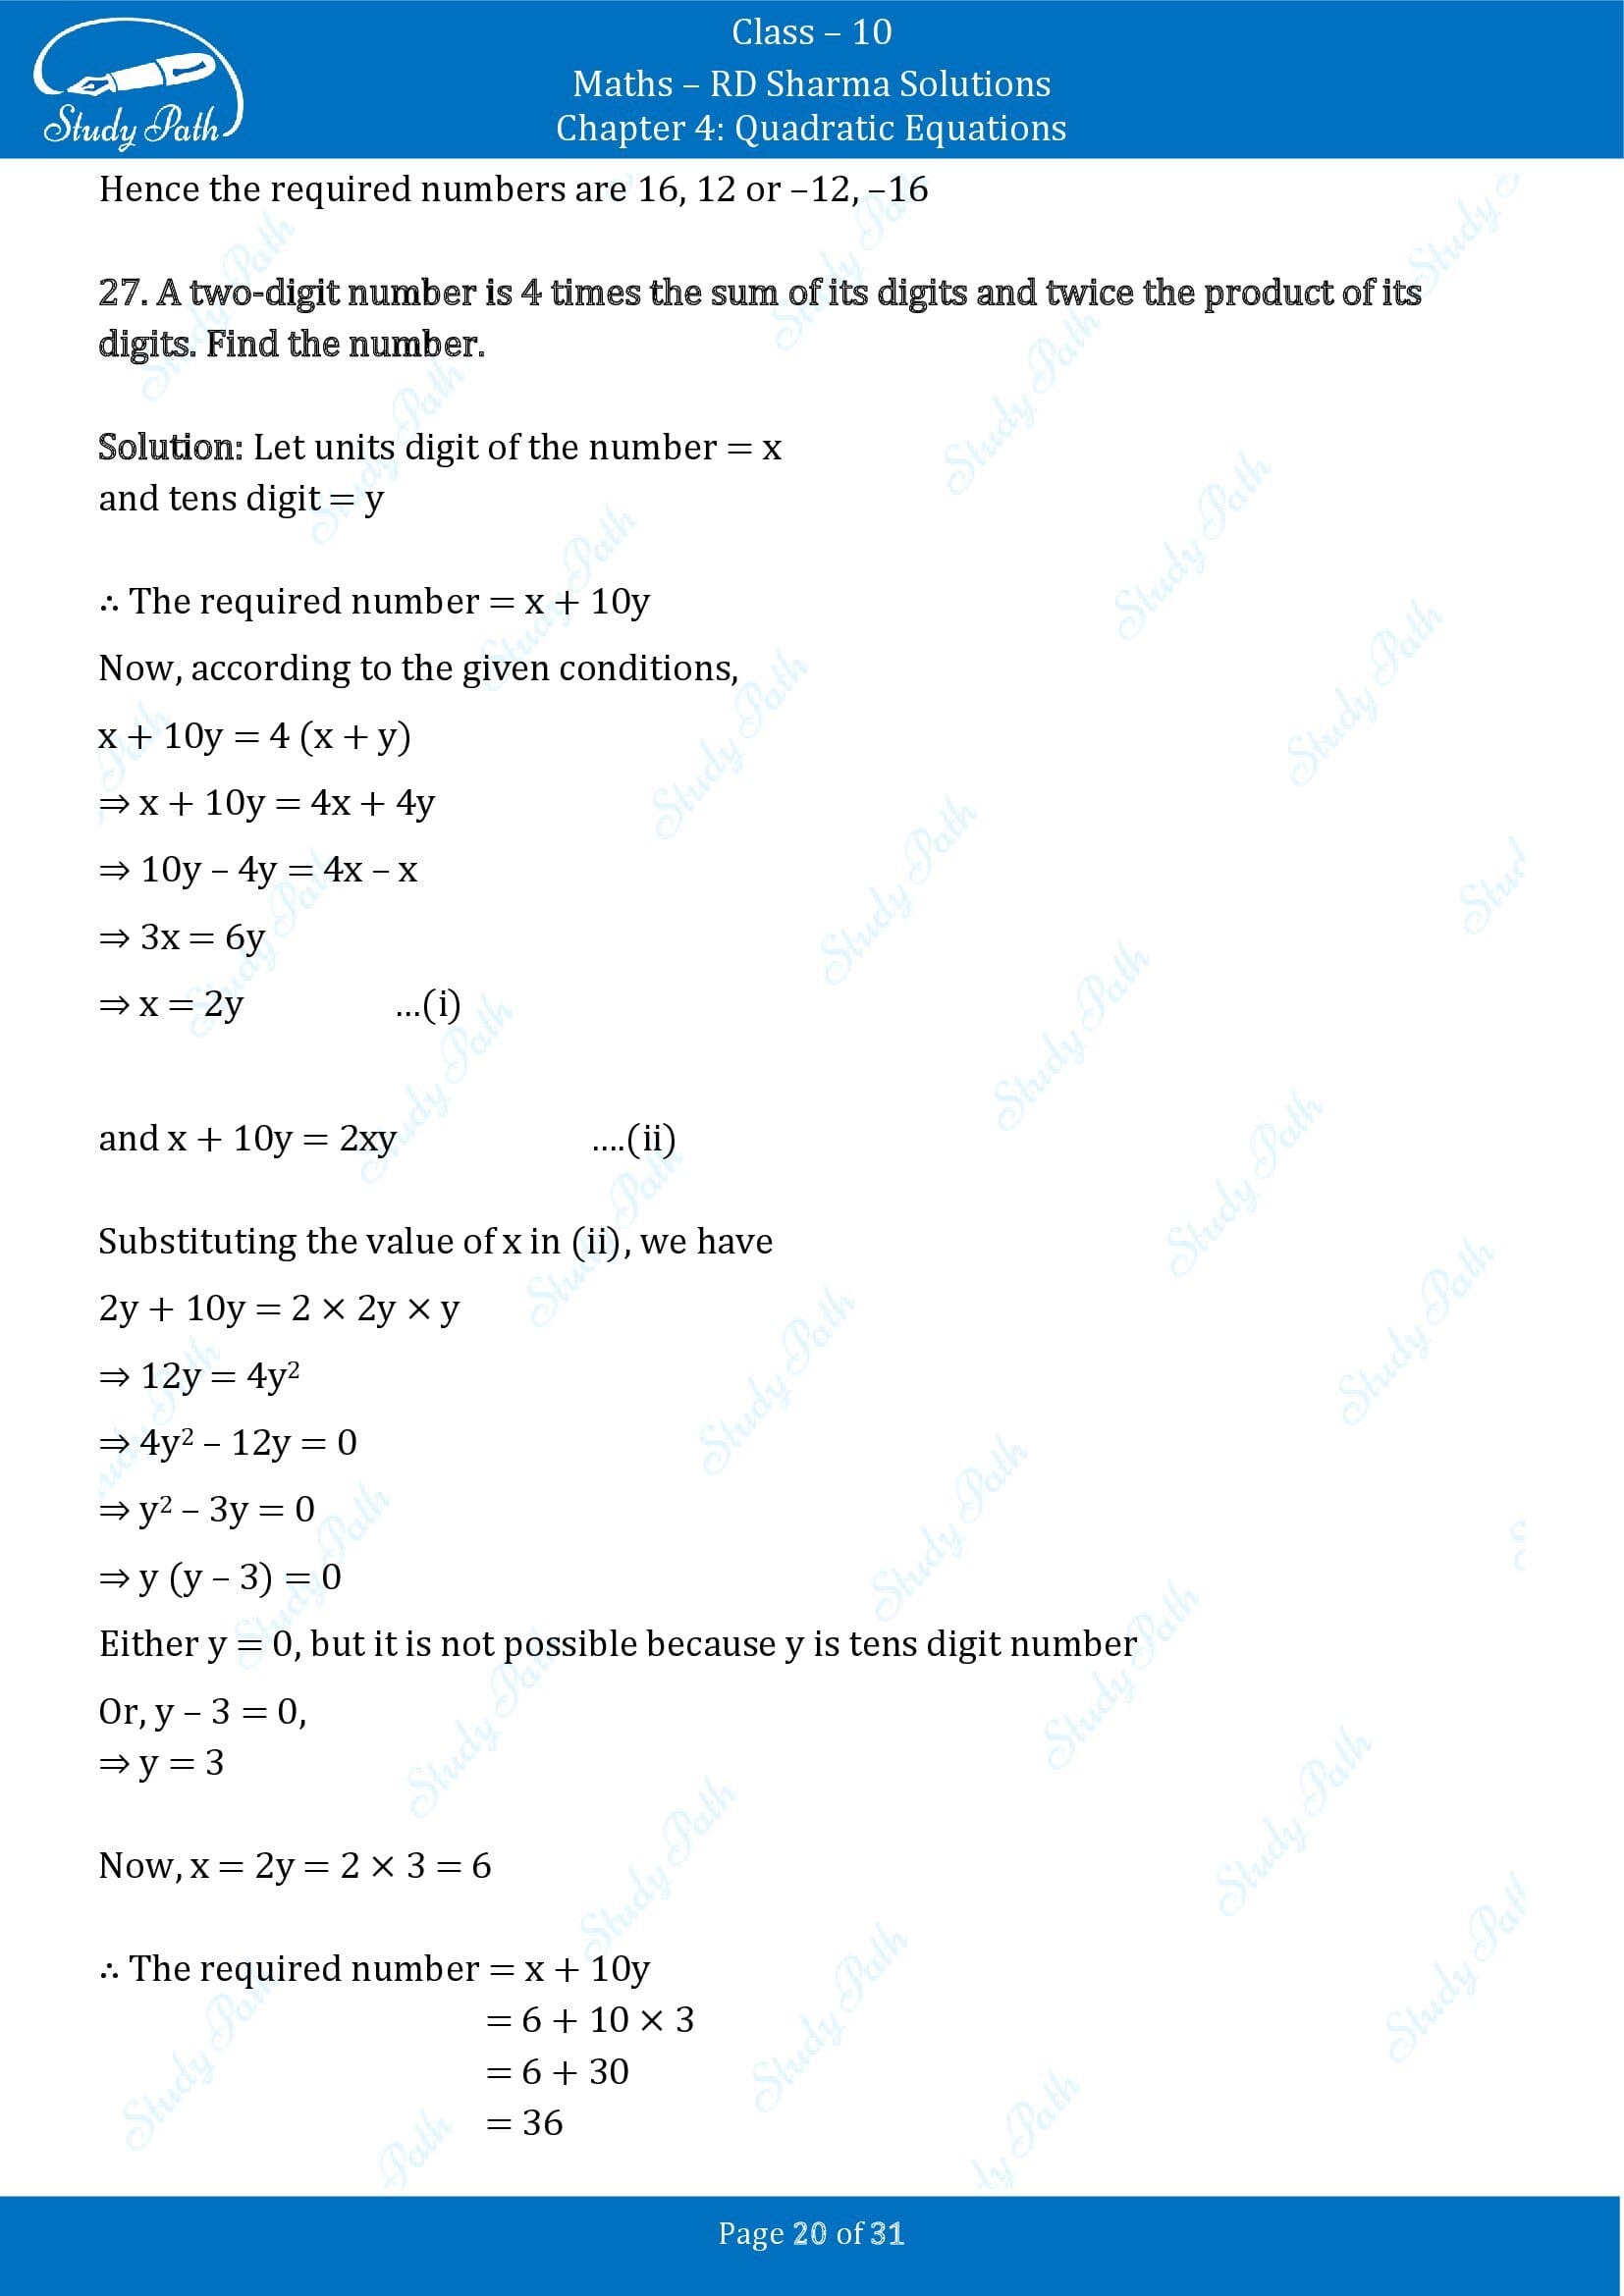 RD Sharma Solutions Class 10 Chapter 4 Quadratic Equations Exercise 4.7 00020